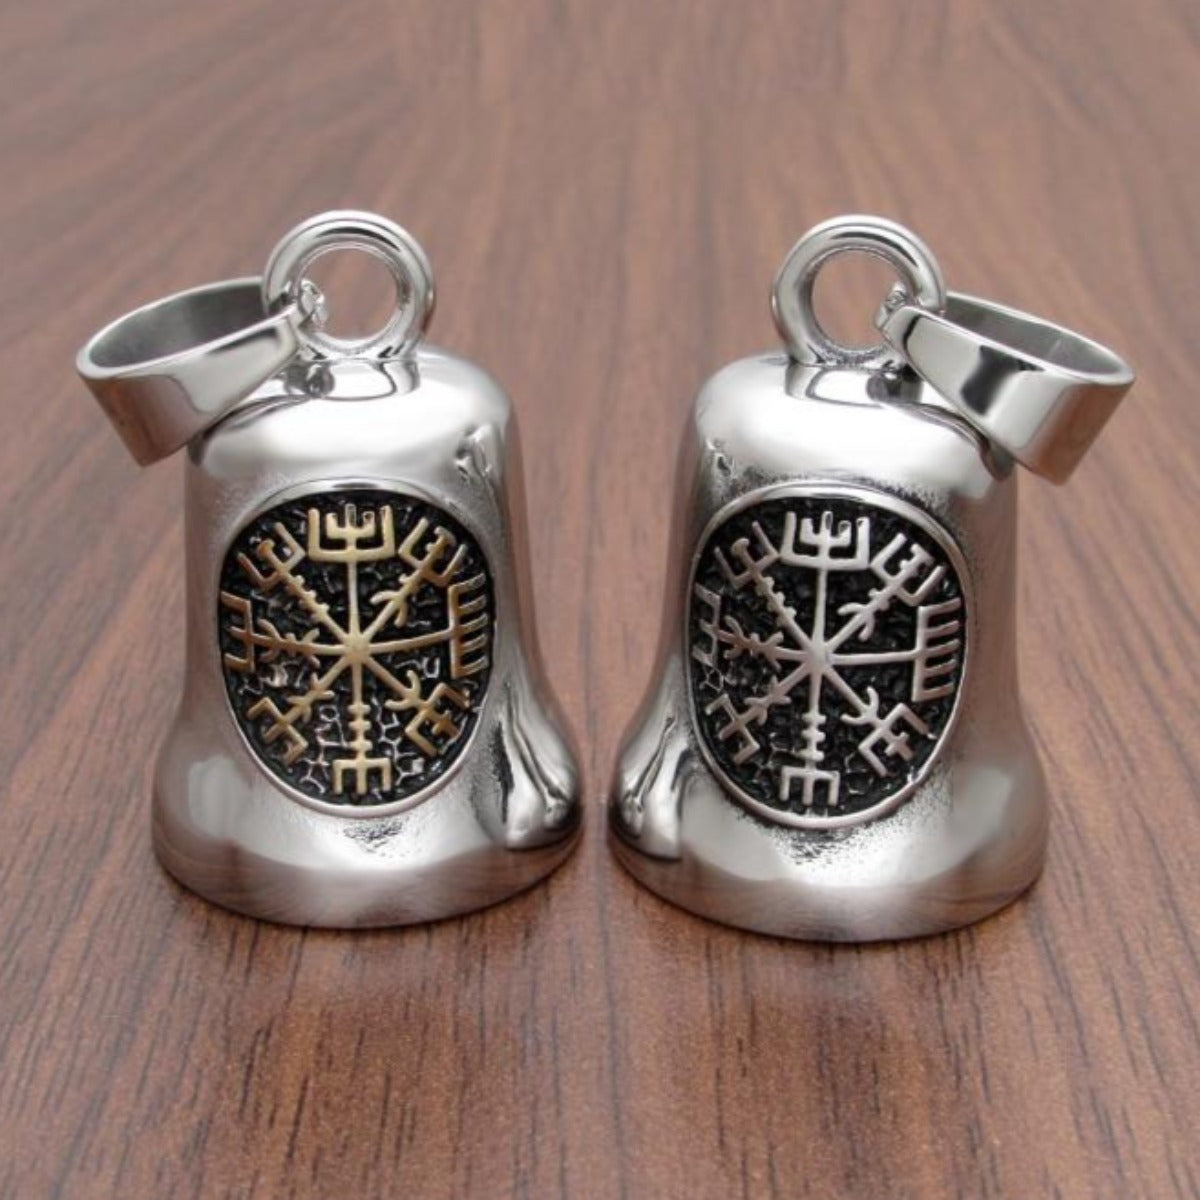 Two Stainless Steel Viking Compass Gremlin Bells with snowflake designs on a wooden surface.